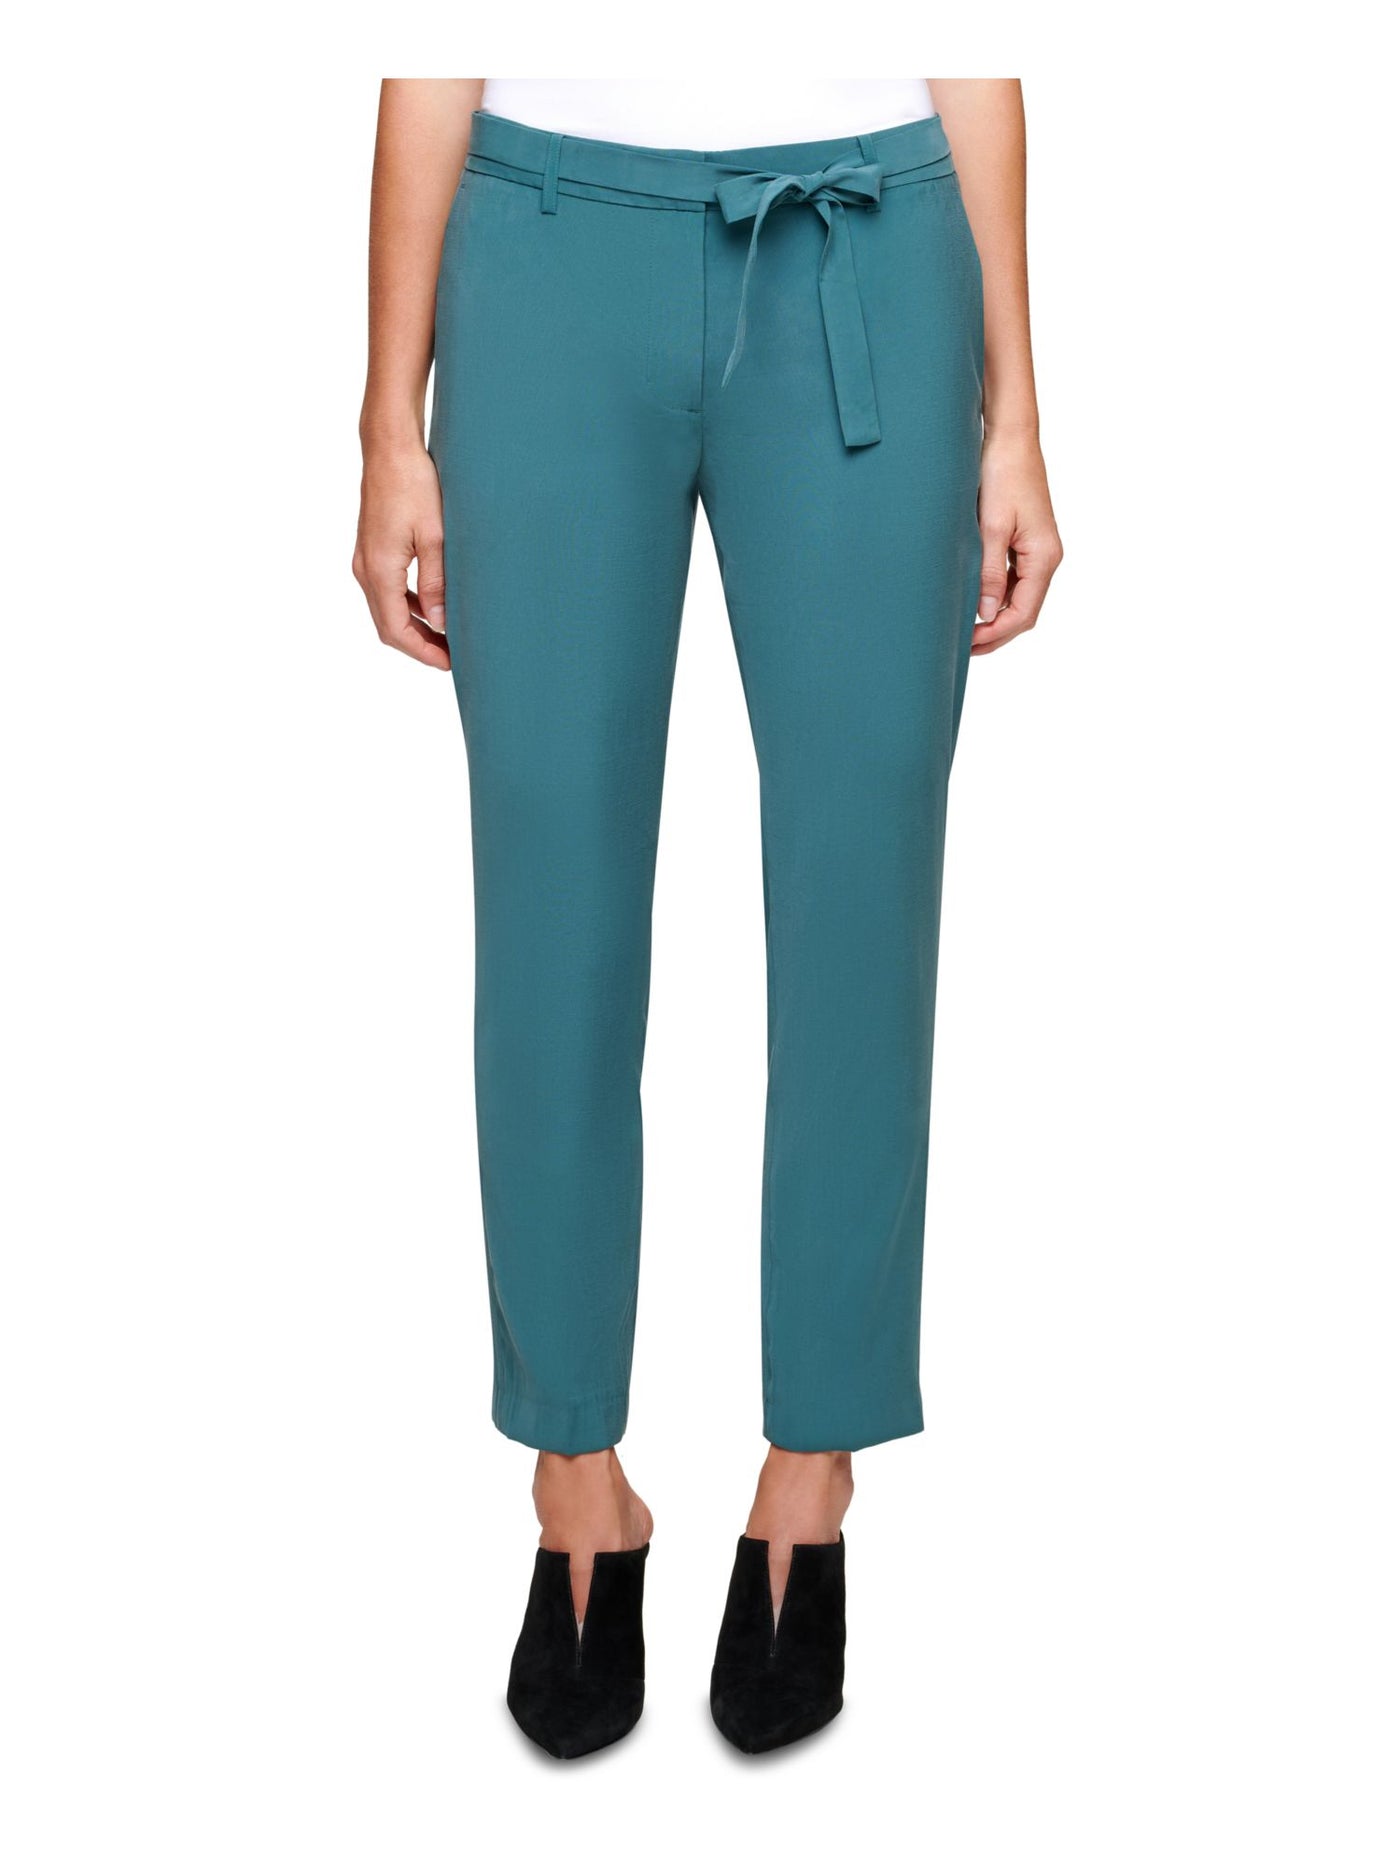 DKNY Womens Green Belted Tie Straight leg Pants 6